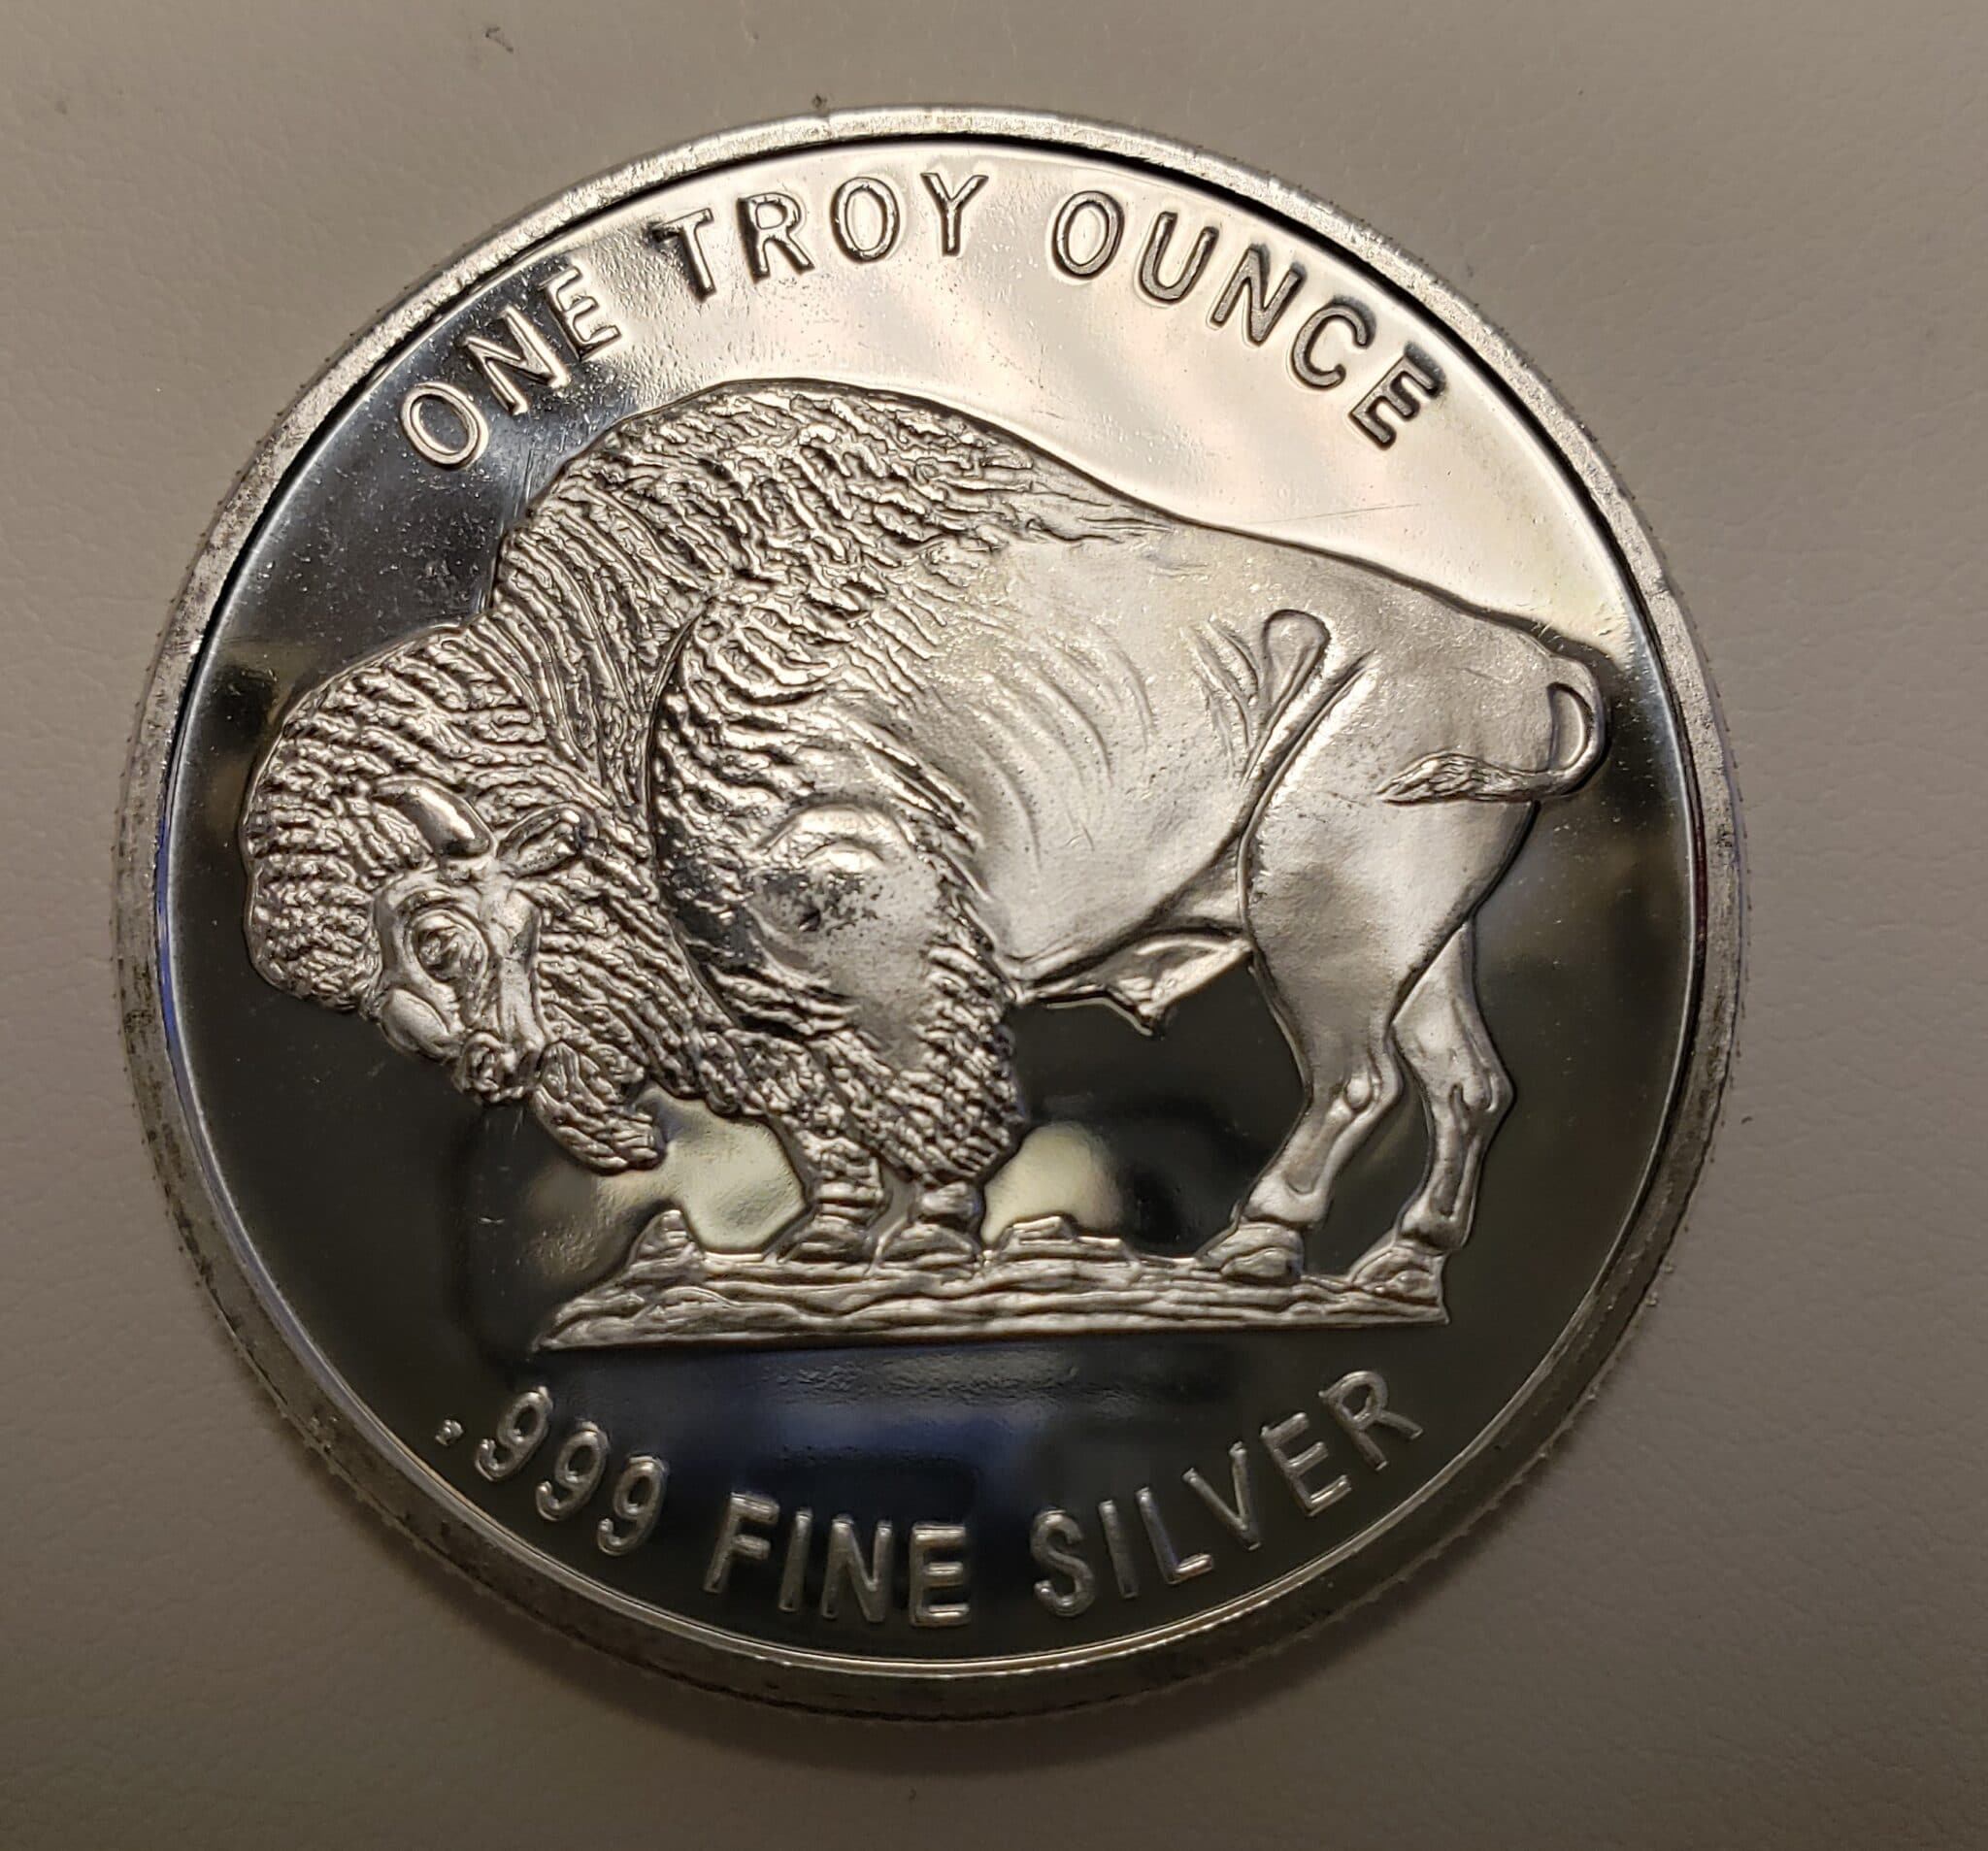 Silver Bullion in 1oz Coins Now in Stock!